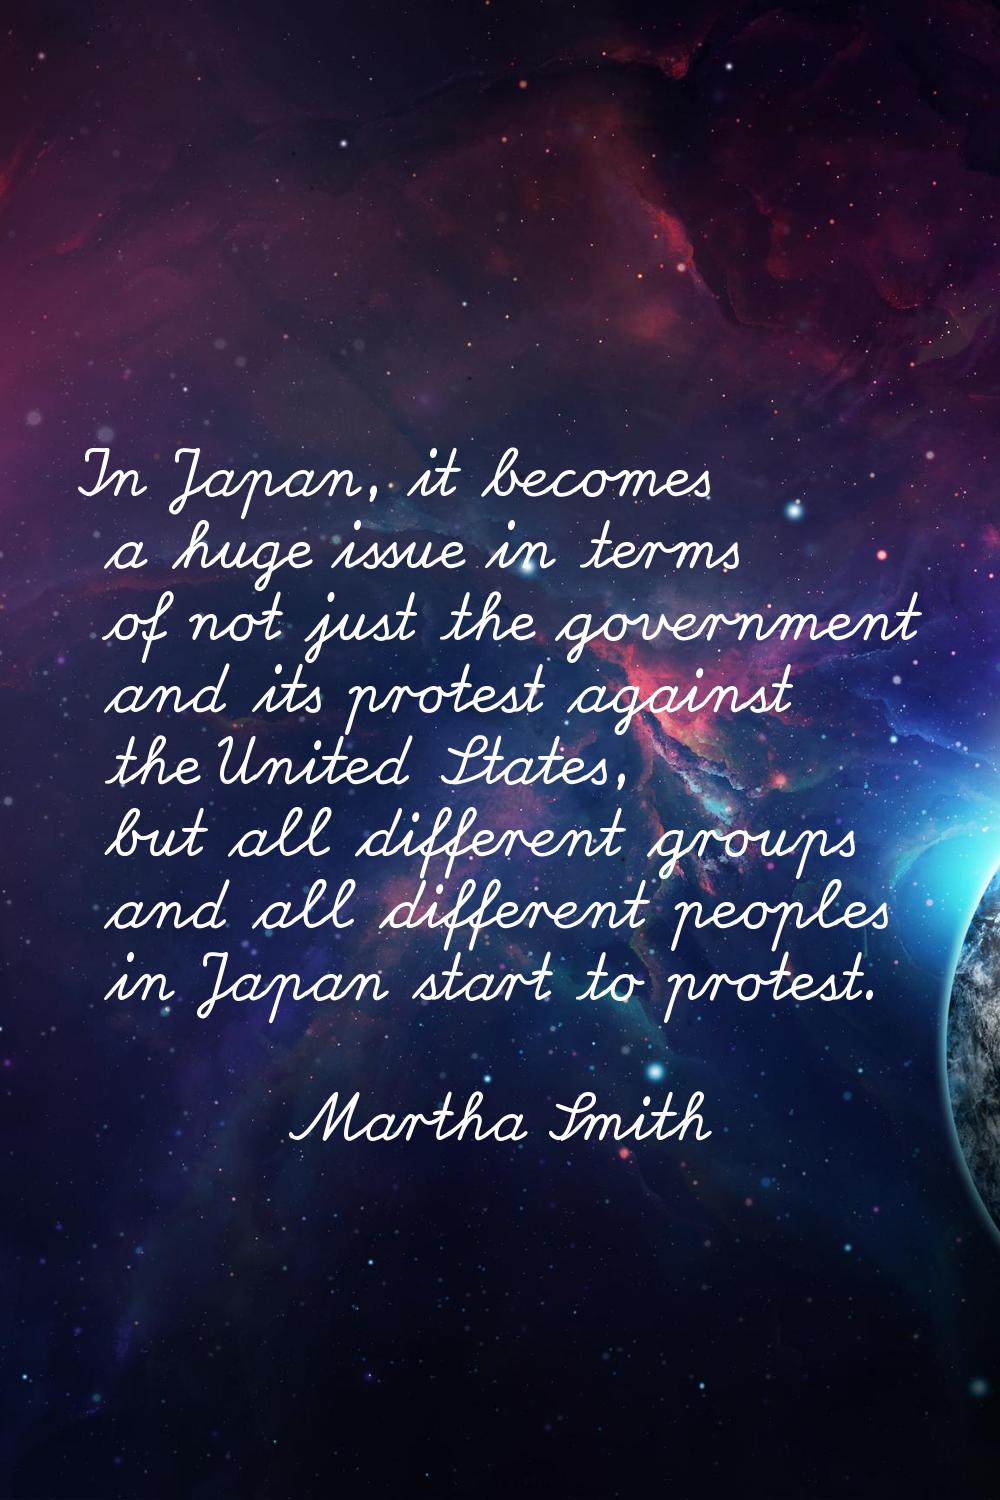 In Japan, it becomes a huge issue in terms of not just the government and its protest against the U